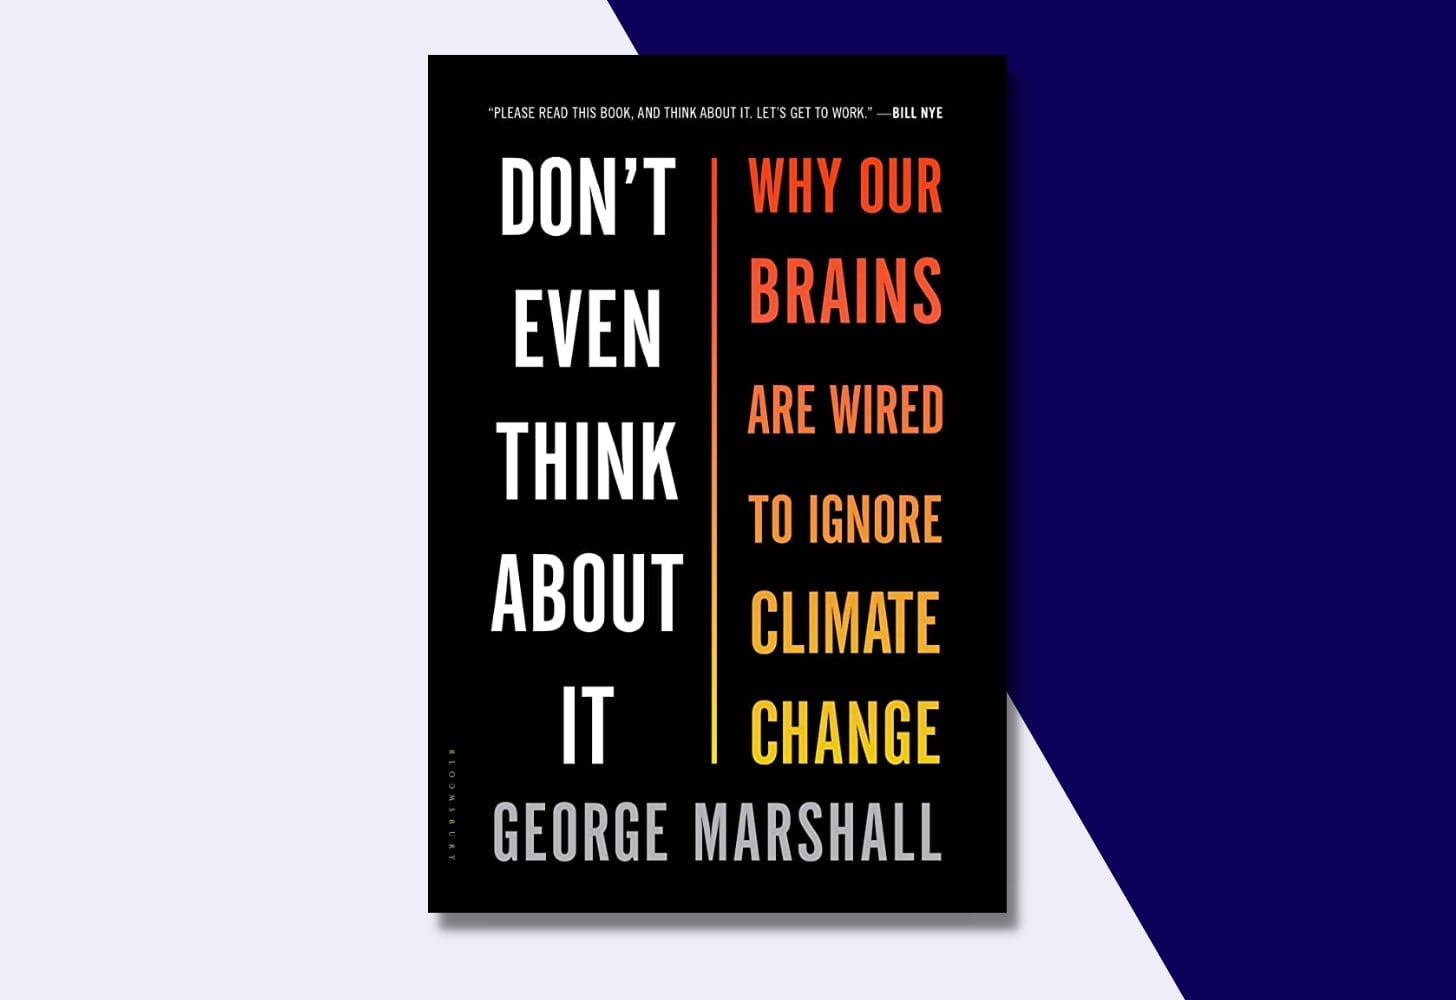 “Don’t Even Think About It: Why Our Brains Are Wired To Ignore Climate Change” by George Marshall